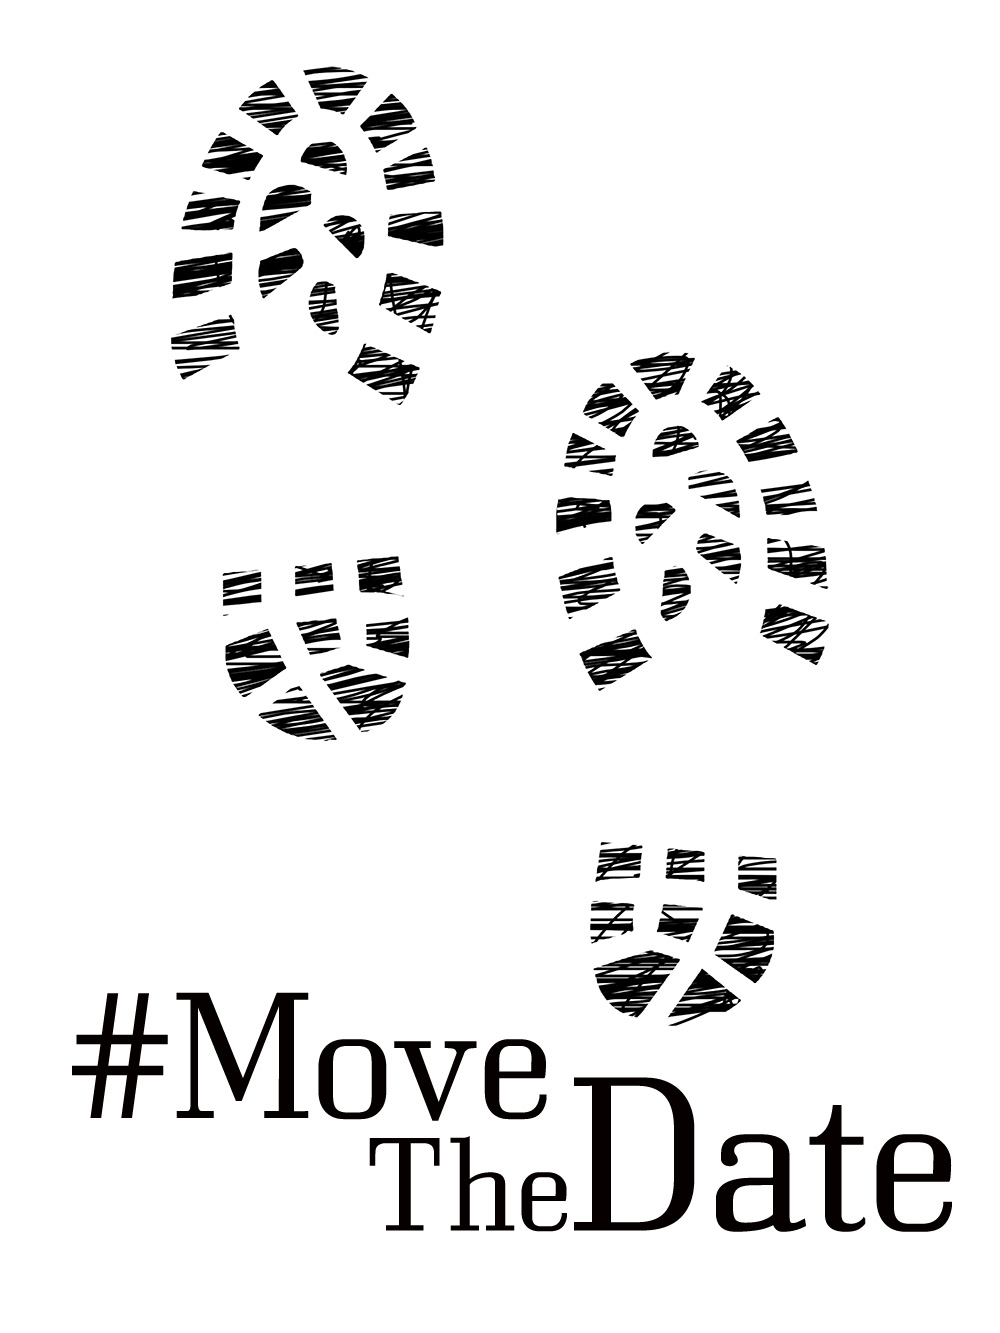 GOOD NEWS – #MoveTheDate – yes we can!